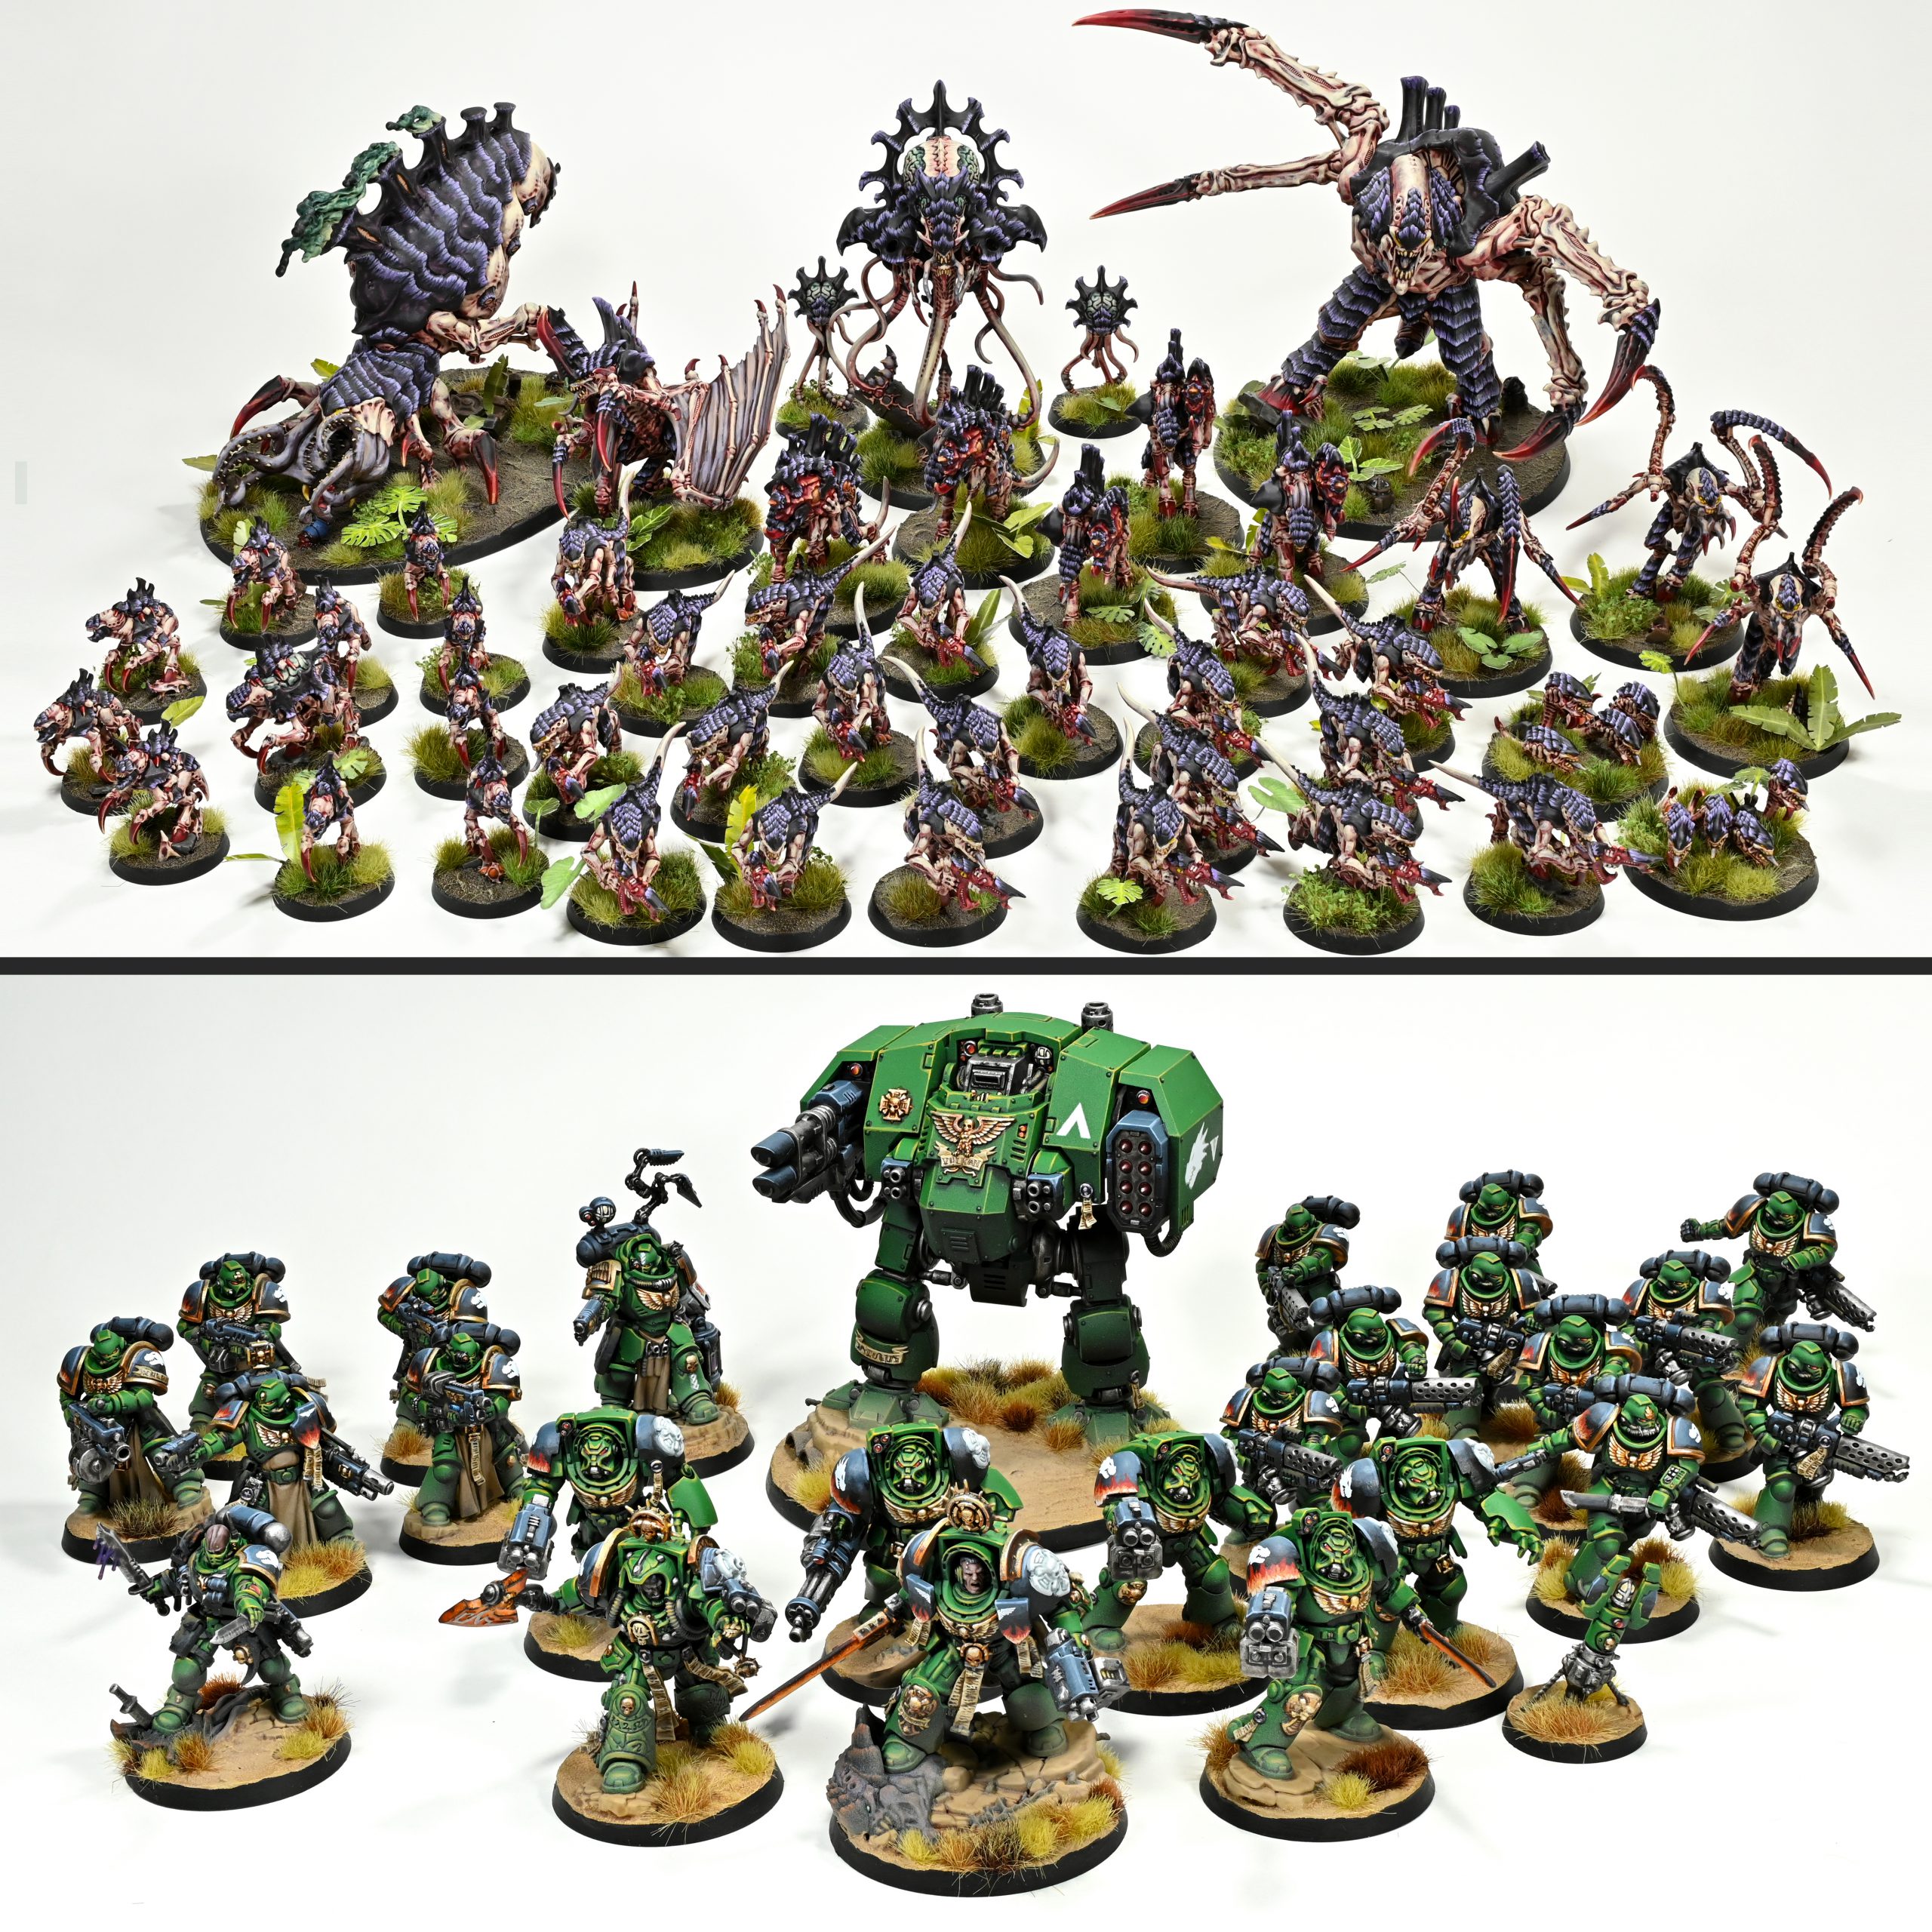 Pro Acryl BETTER than GW and Army Painter for painting Warhammer